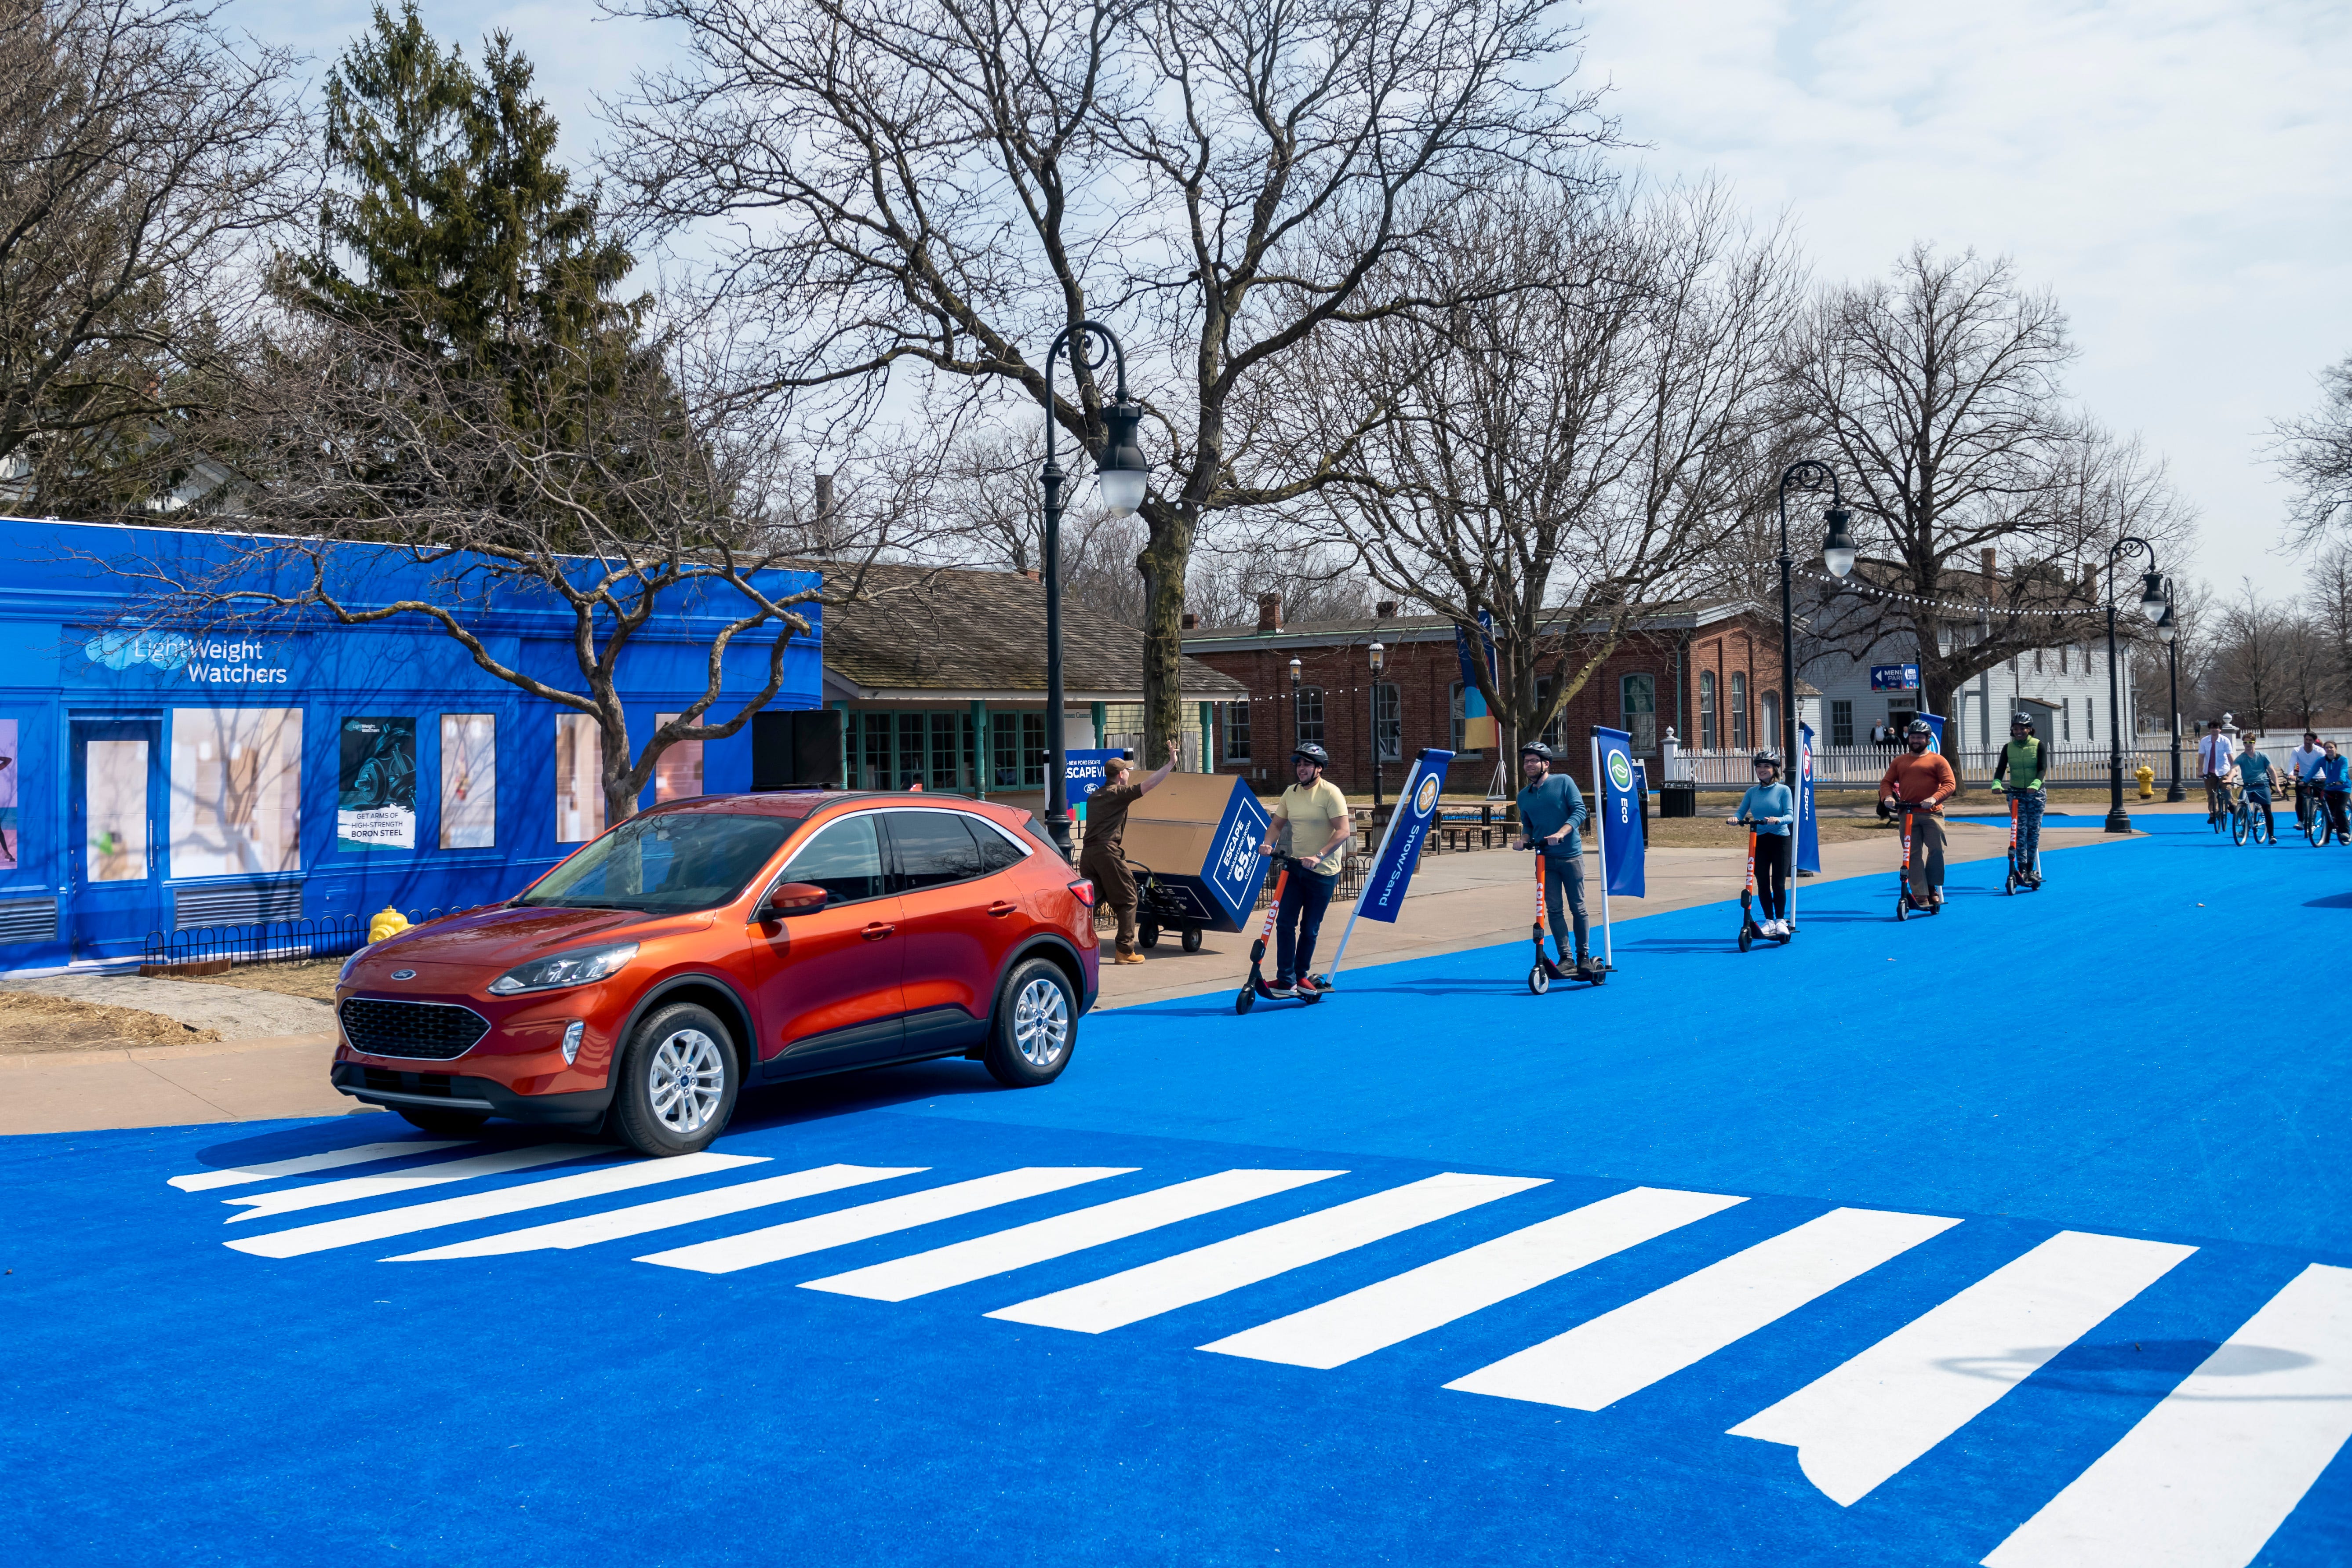 Actors, performers and artists participate in the reveal of the 2020 Ford Escape during a live performance at Greenfield Village.